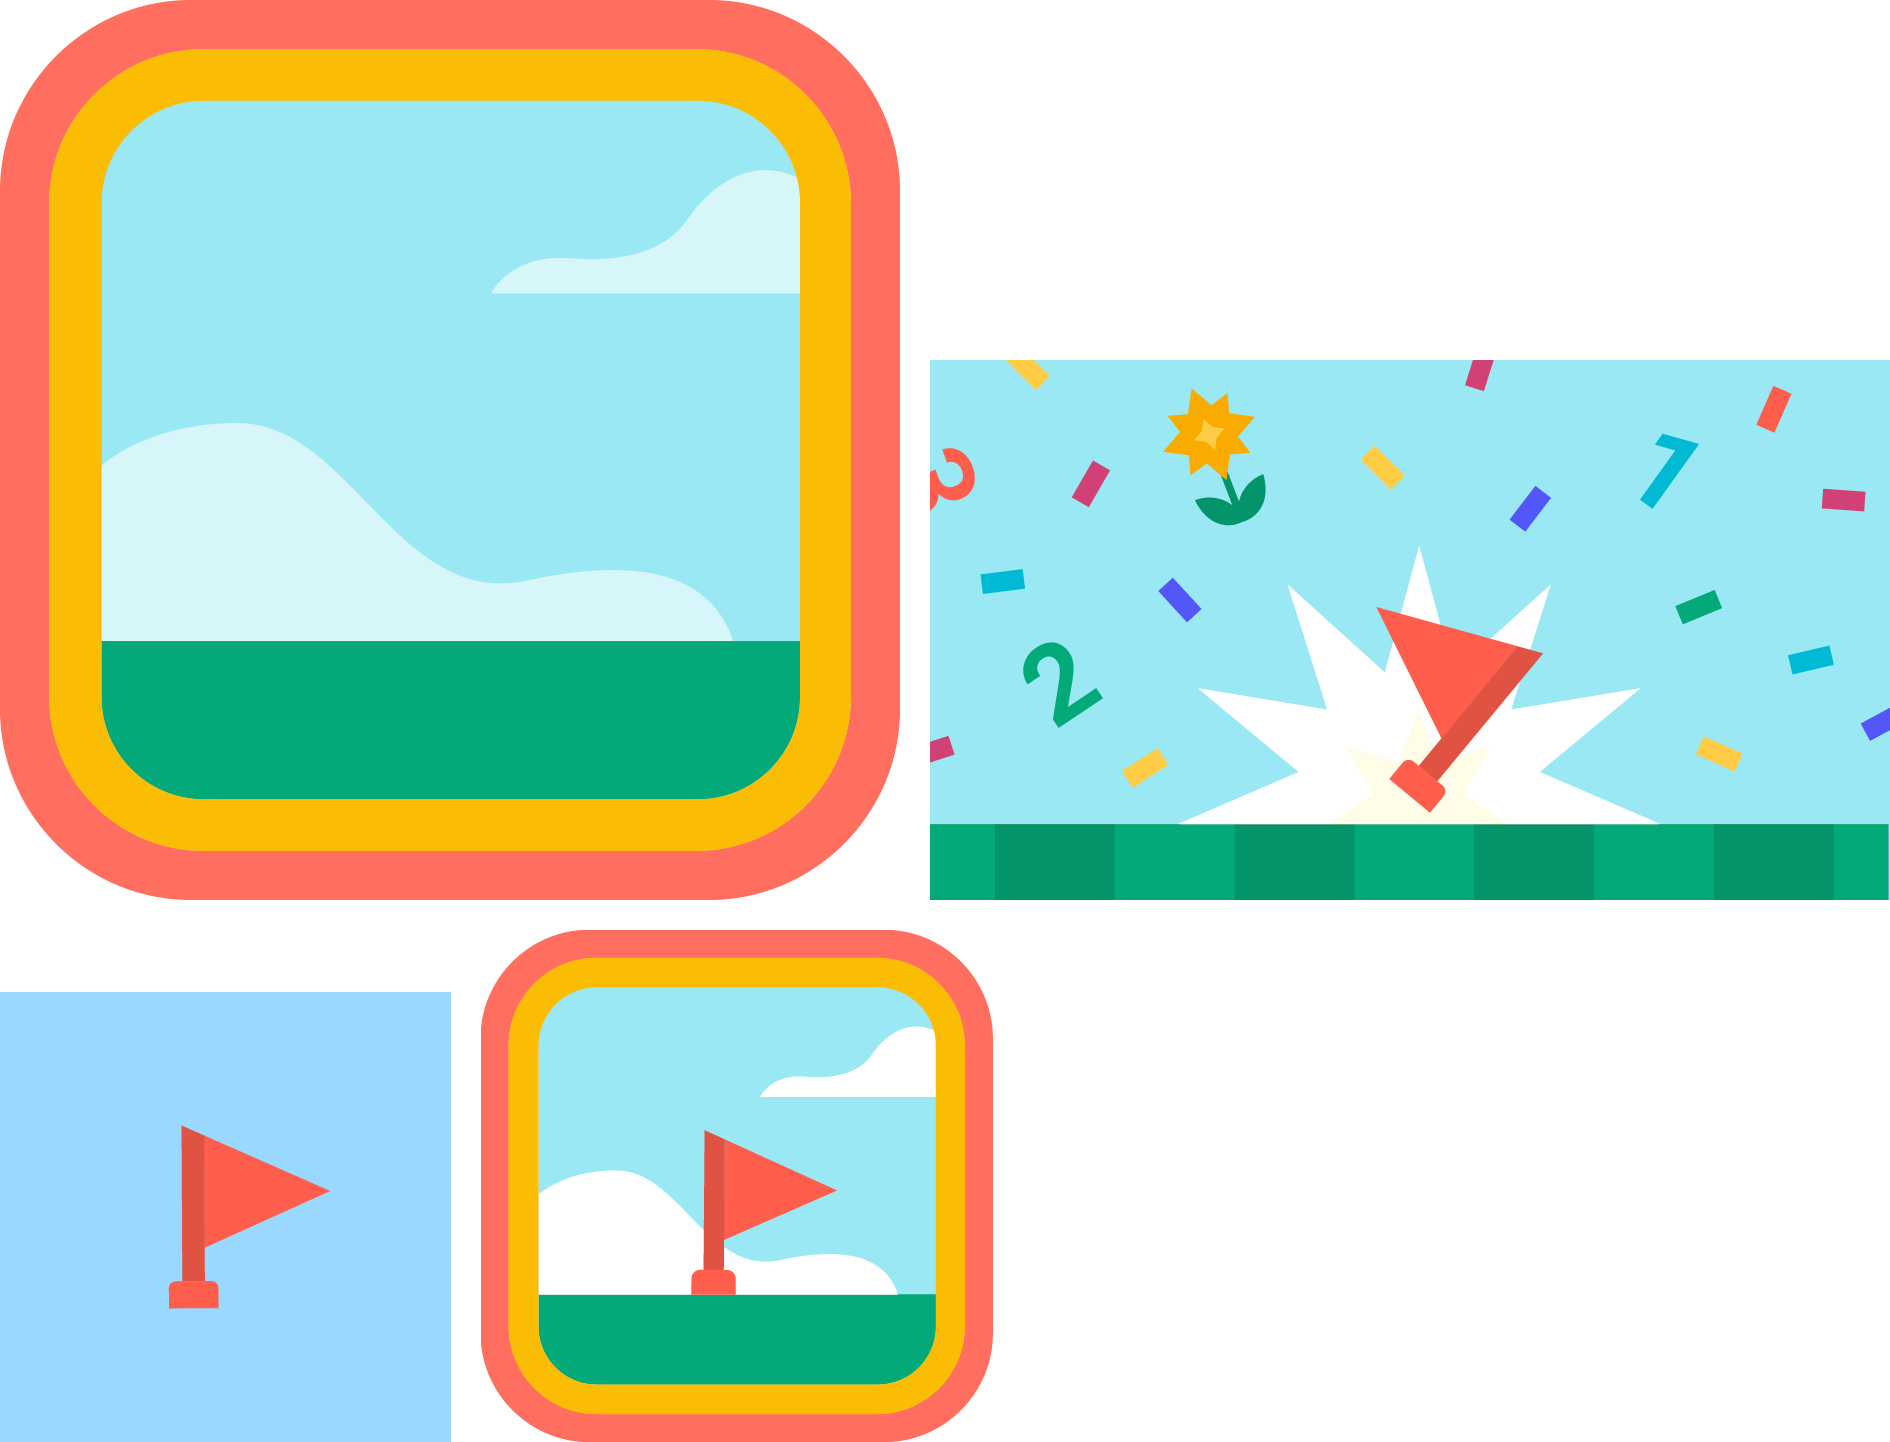 Google Play Games - Icons & Banners